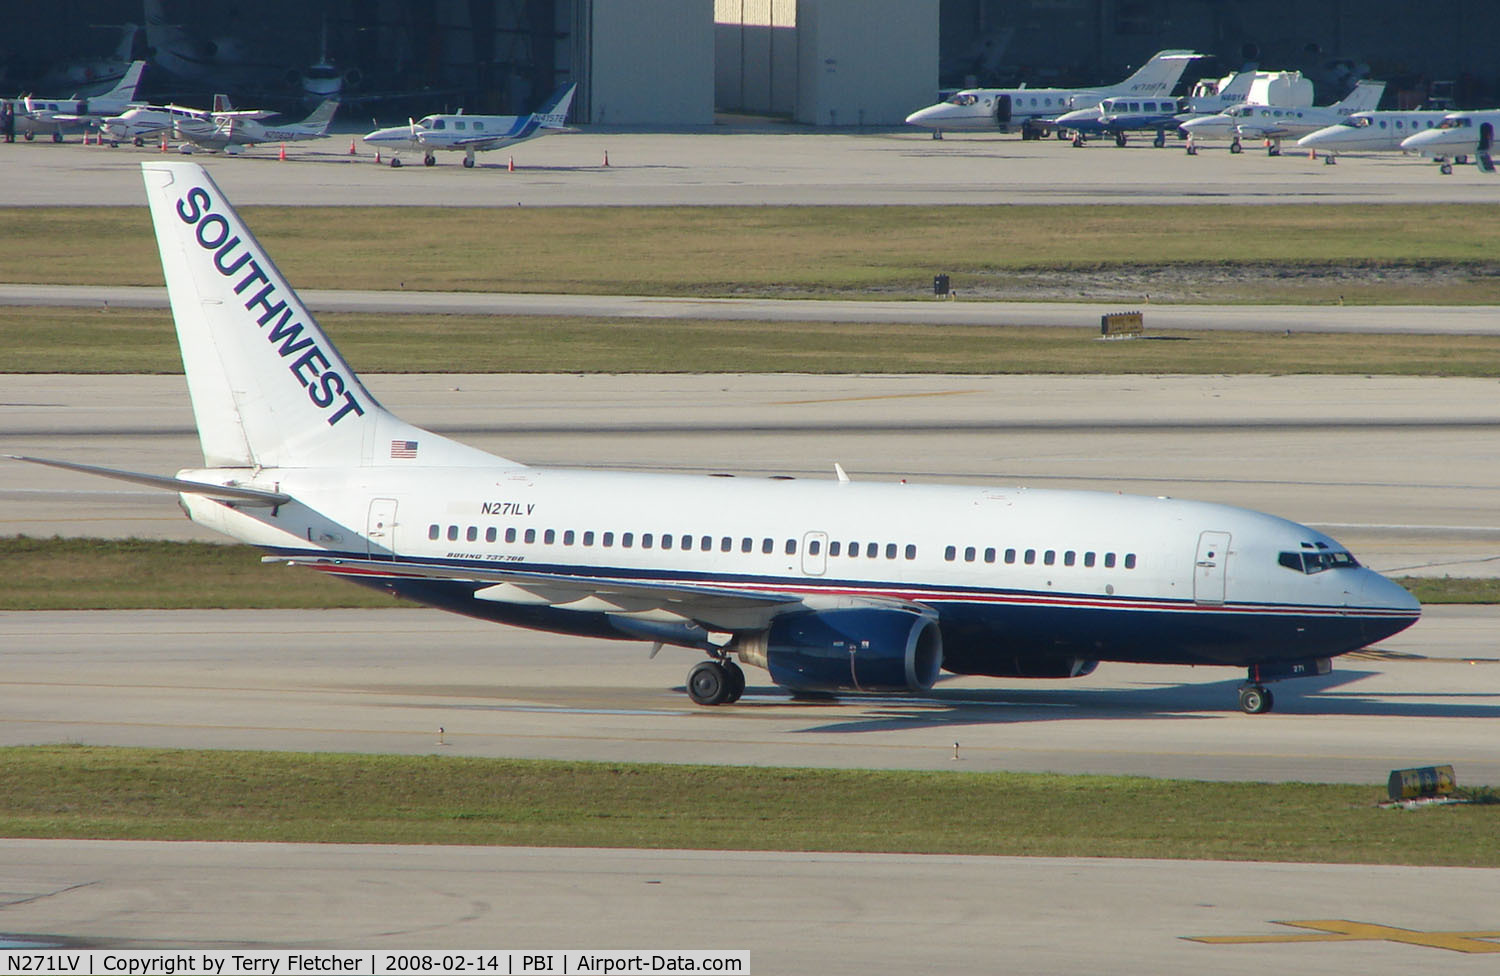 N271LV, 1998 Boeing 737-705 C/N 29090, Unusual to see a Southwest aircraft in a non-standard livery